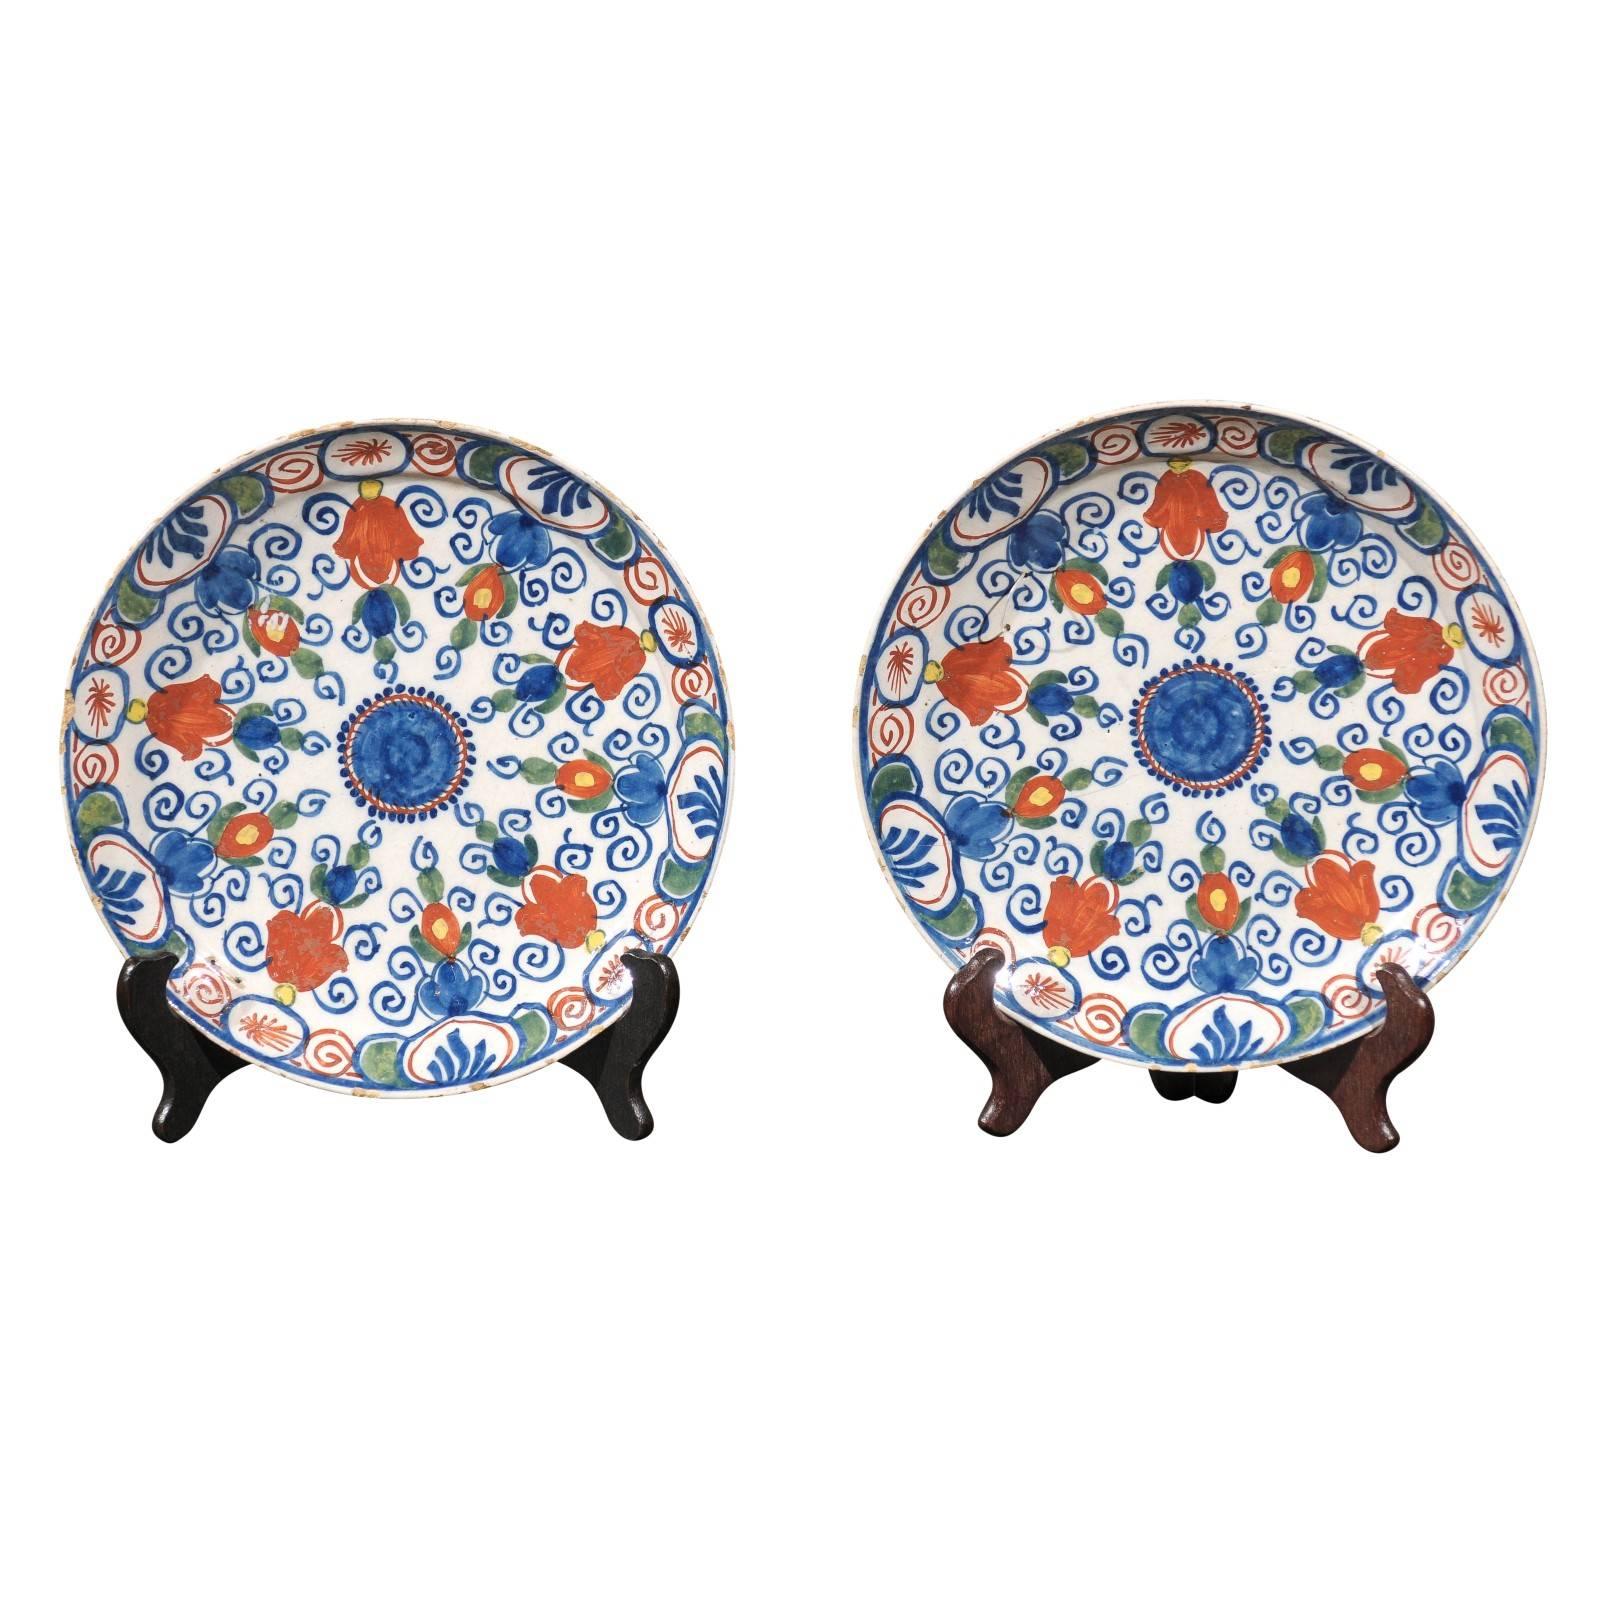 Pair of 17th Century Polychrome Delft Plates, circa 1690 For Sale